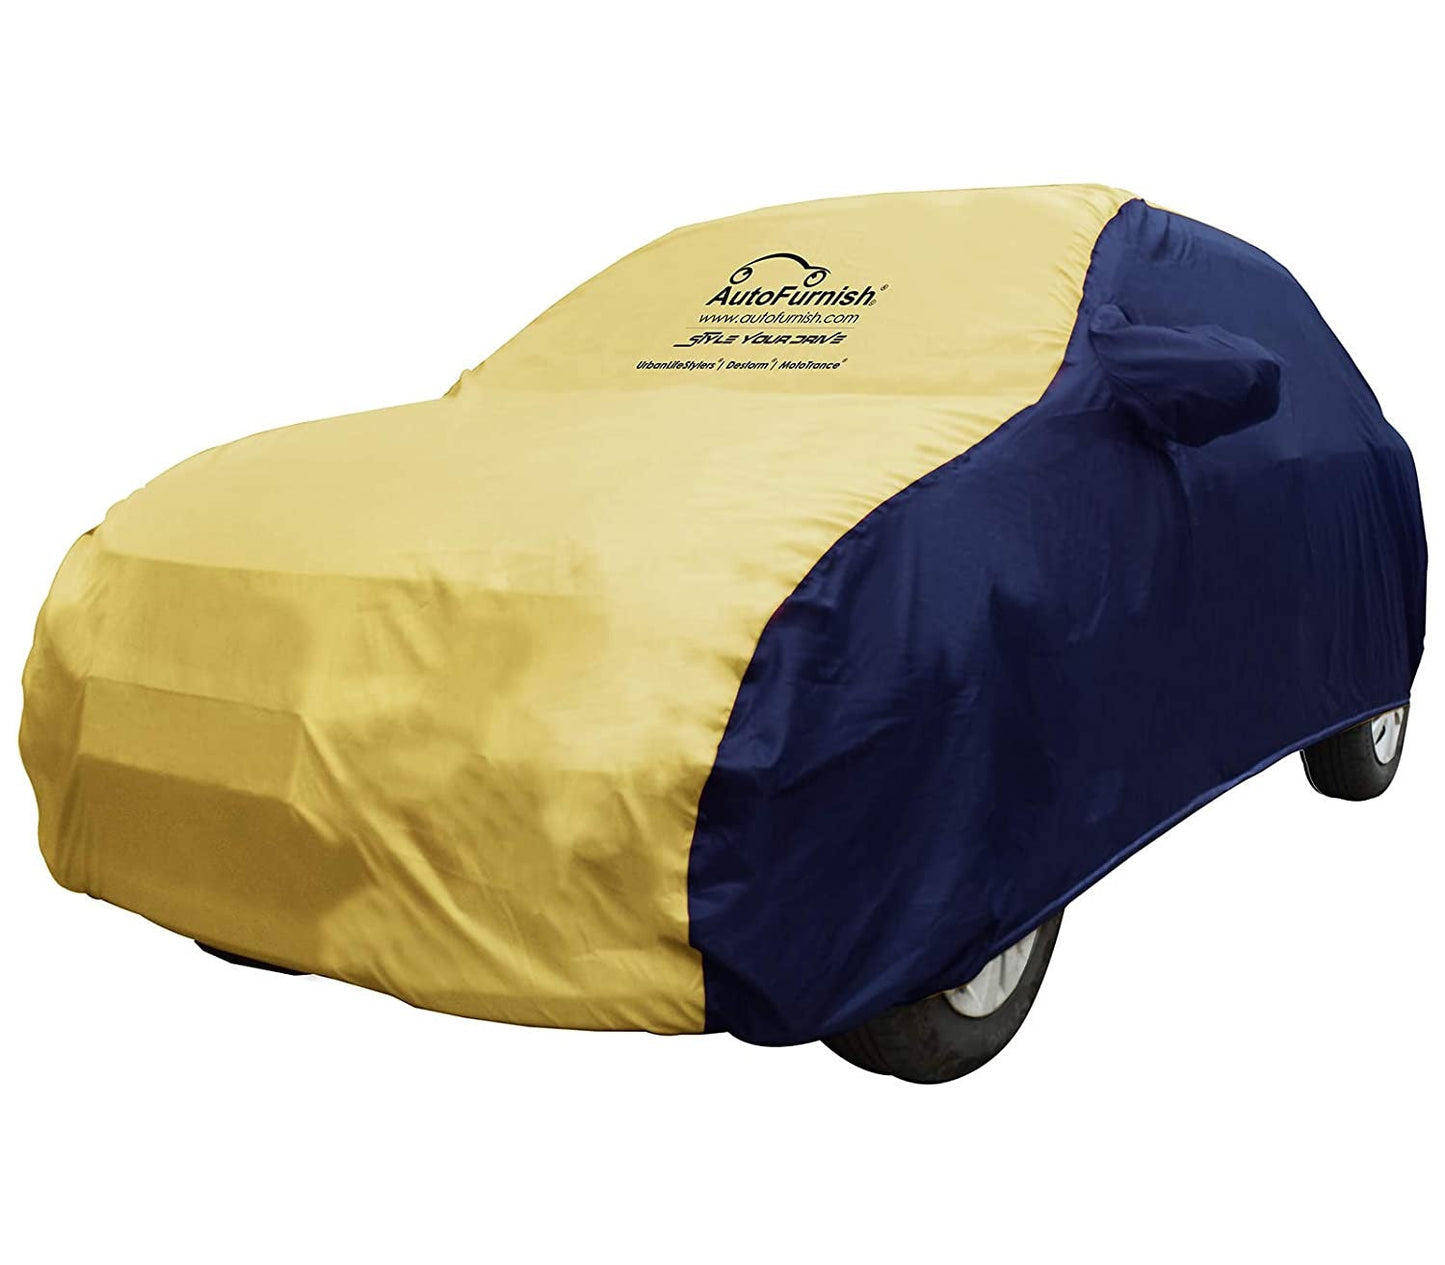 BMW X7 xDrive (2019) Car Body Cover, Triple Stitched, Heat & Water Resistant with Side Mirror Pockets (SPORTY Series)